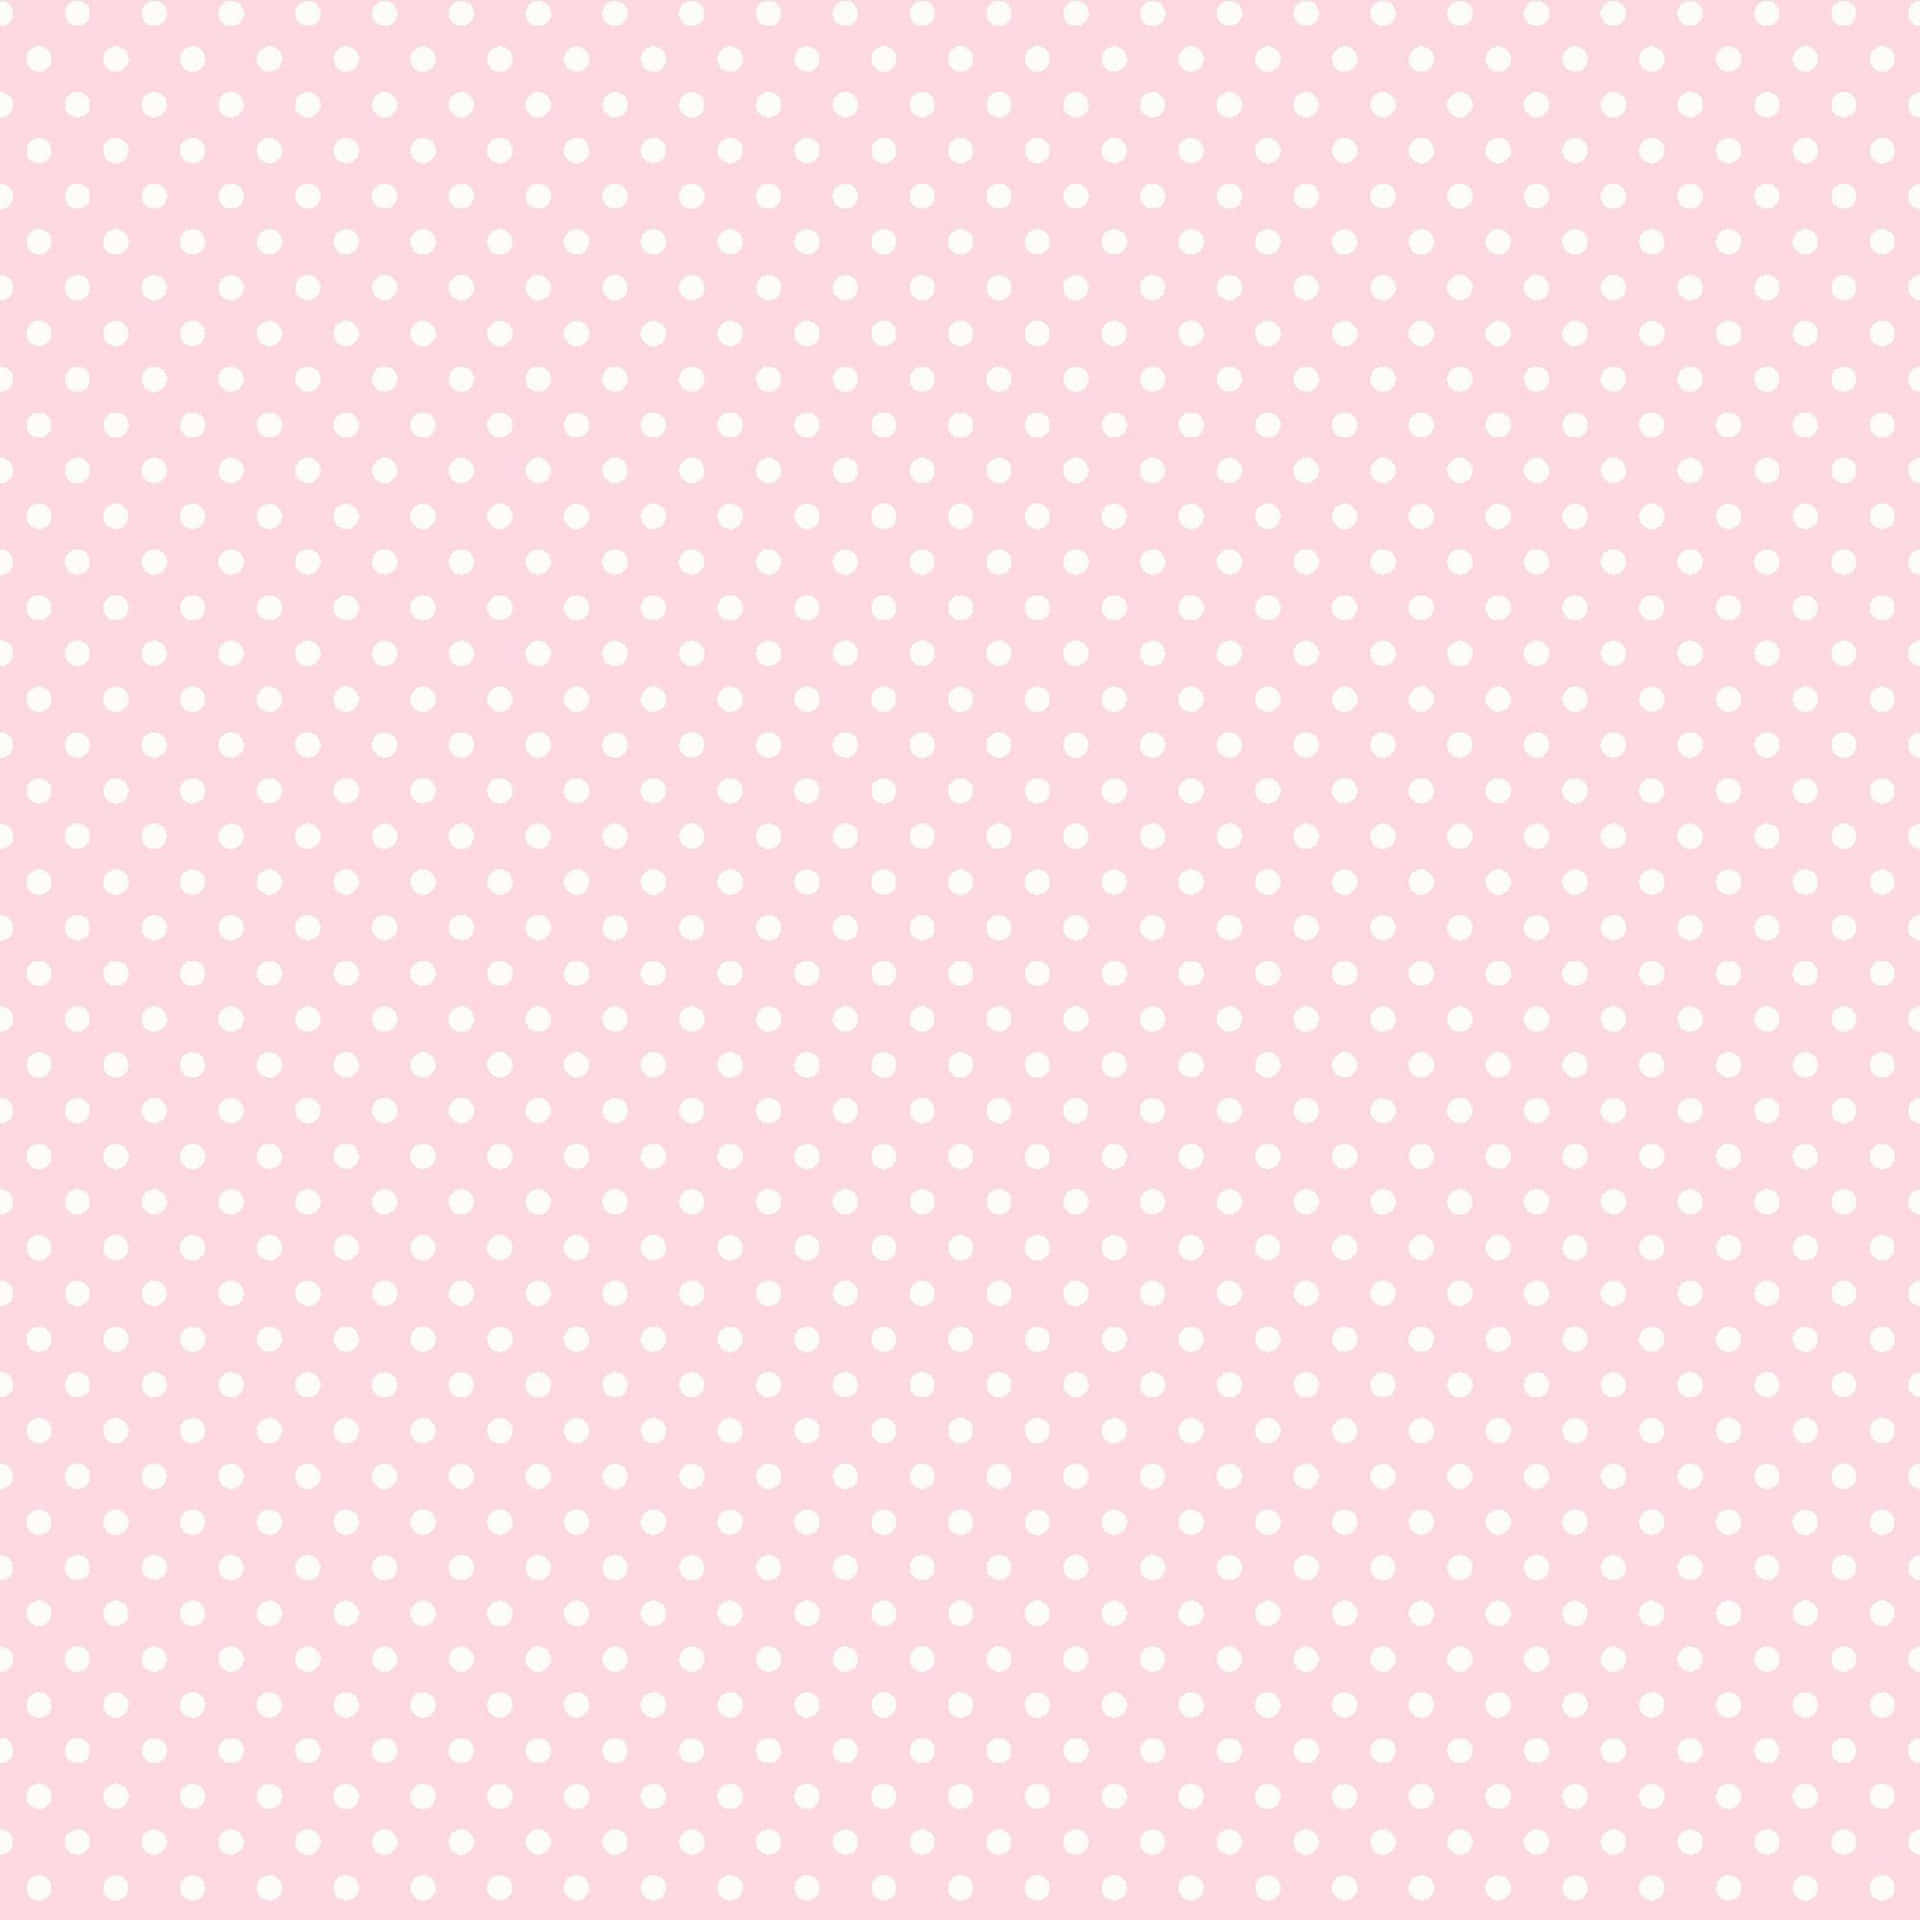 Soft and soothing pink and white background